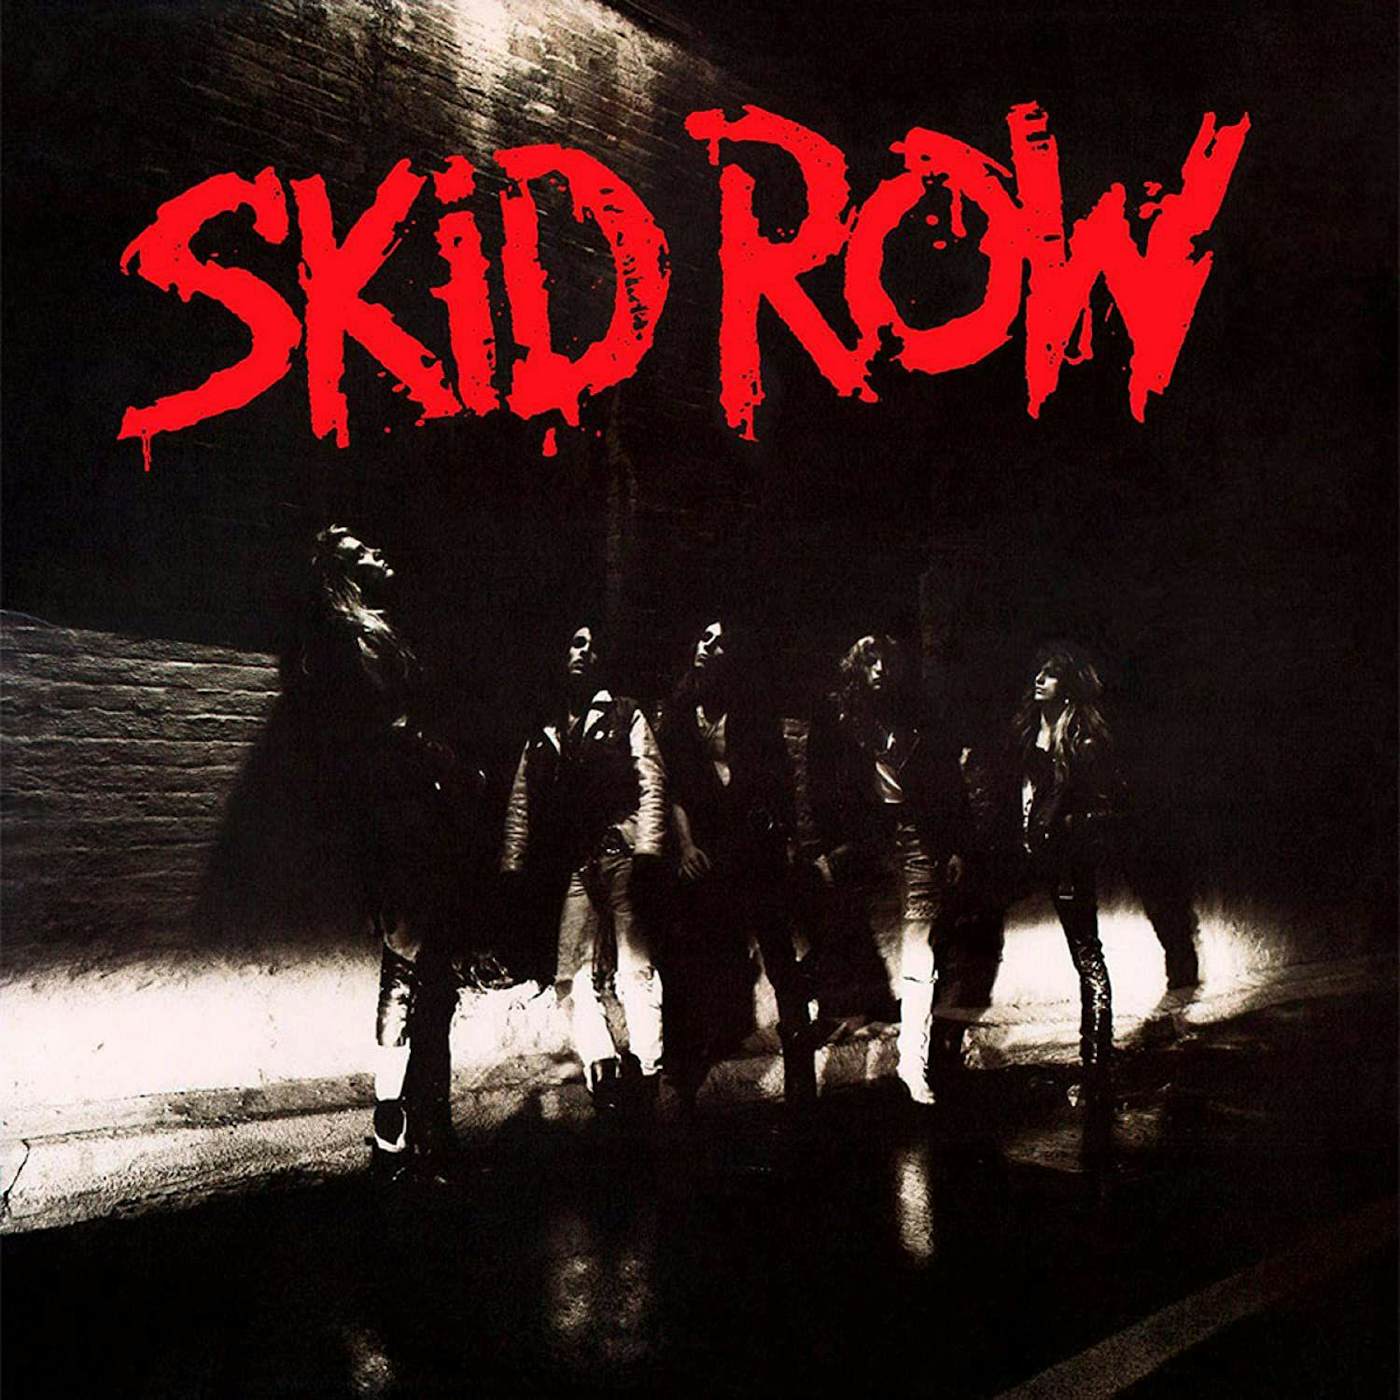 Skid Row S/T (Dark Violet Audiophile Limited Anniversary Edition) Vinyl Record